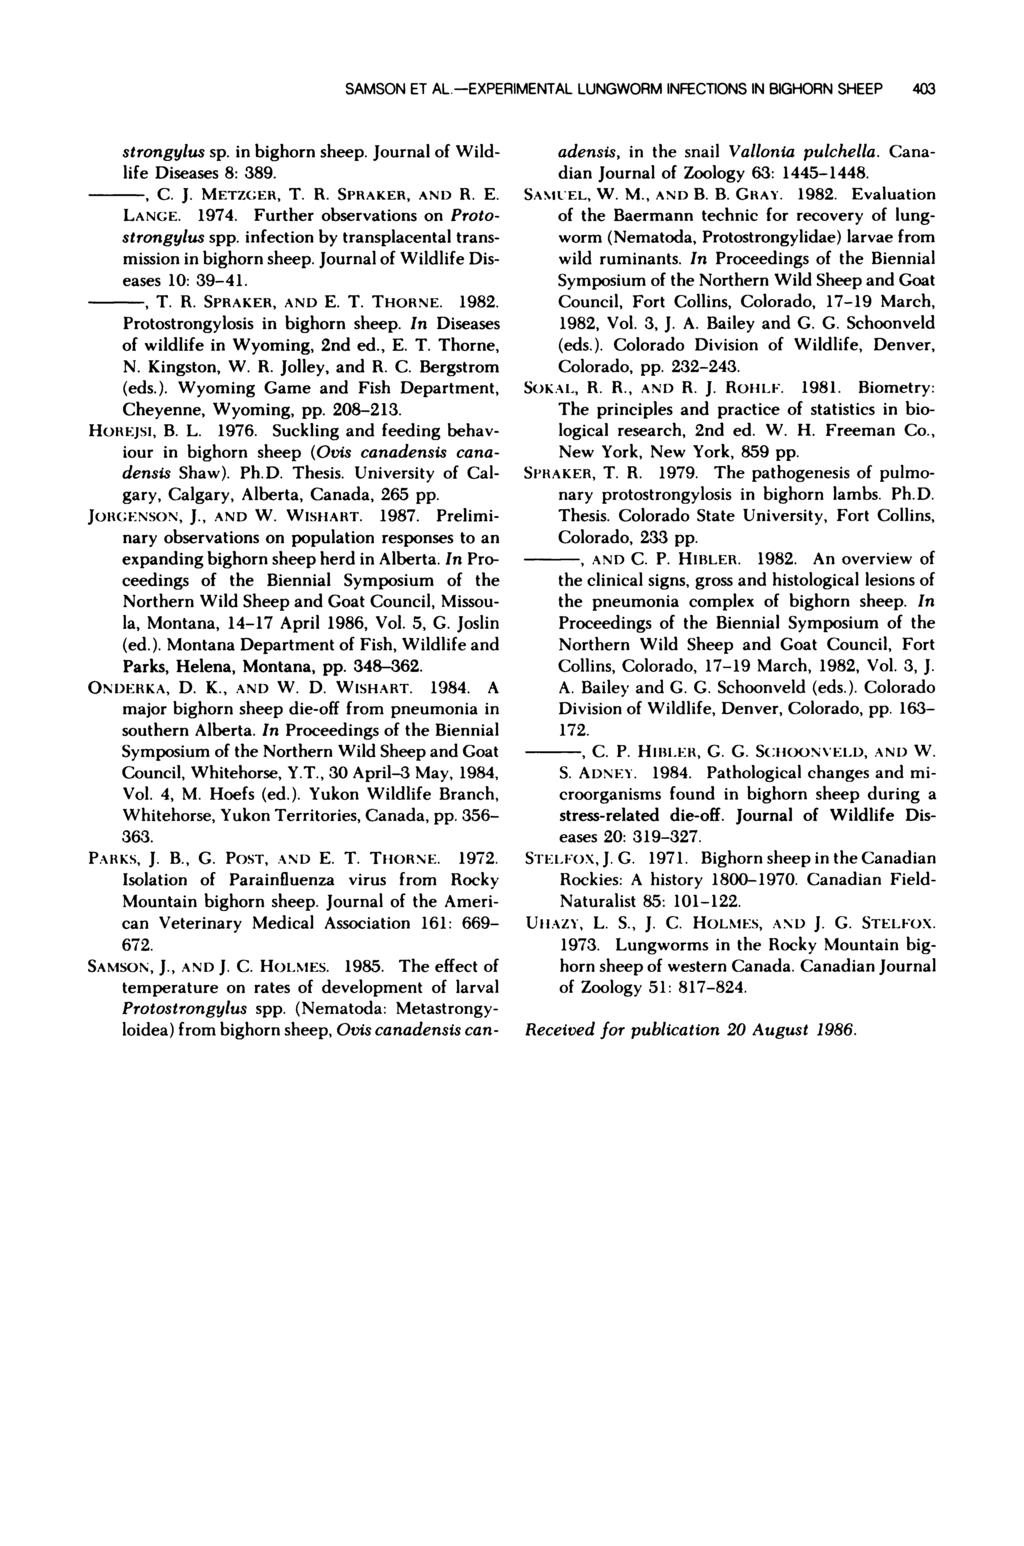 SAMSON ET ALEXPERIMENTAL LUNGWORM INFECONS IN BIGHORN SHEEP 4 strongylus sp. in bighorn sheep. Journal of Wildlife Diseases 8: 89. C. J. METZGER, T. R. SPRAKER, AND R. E. LANGE. 1974.